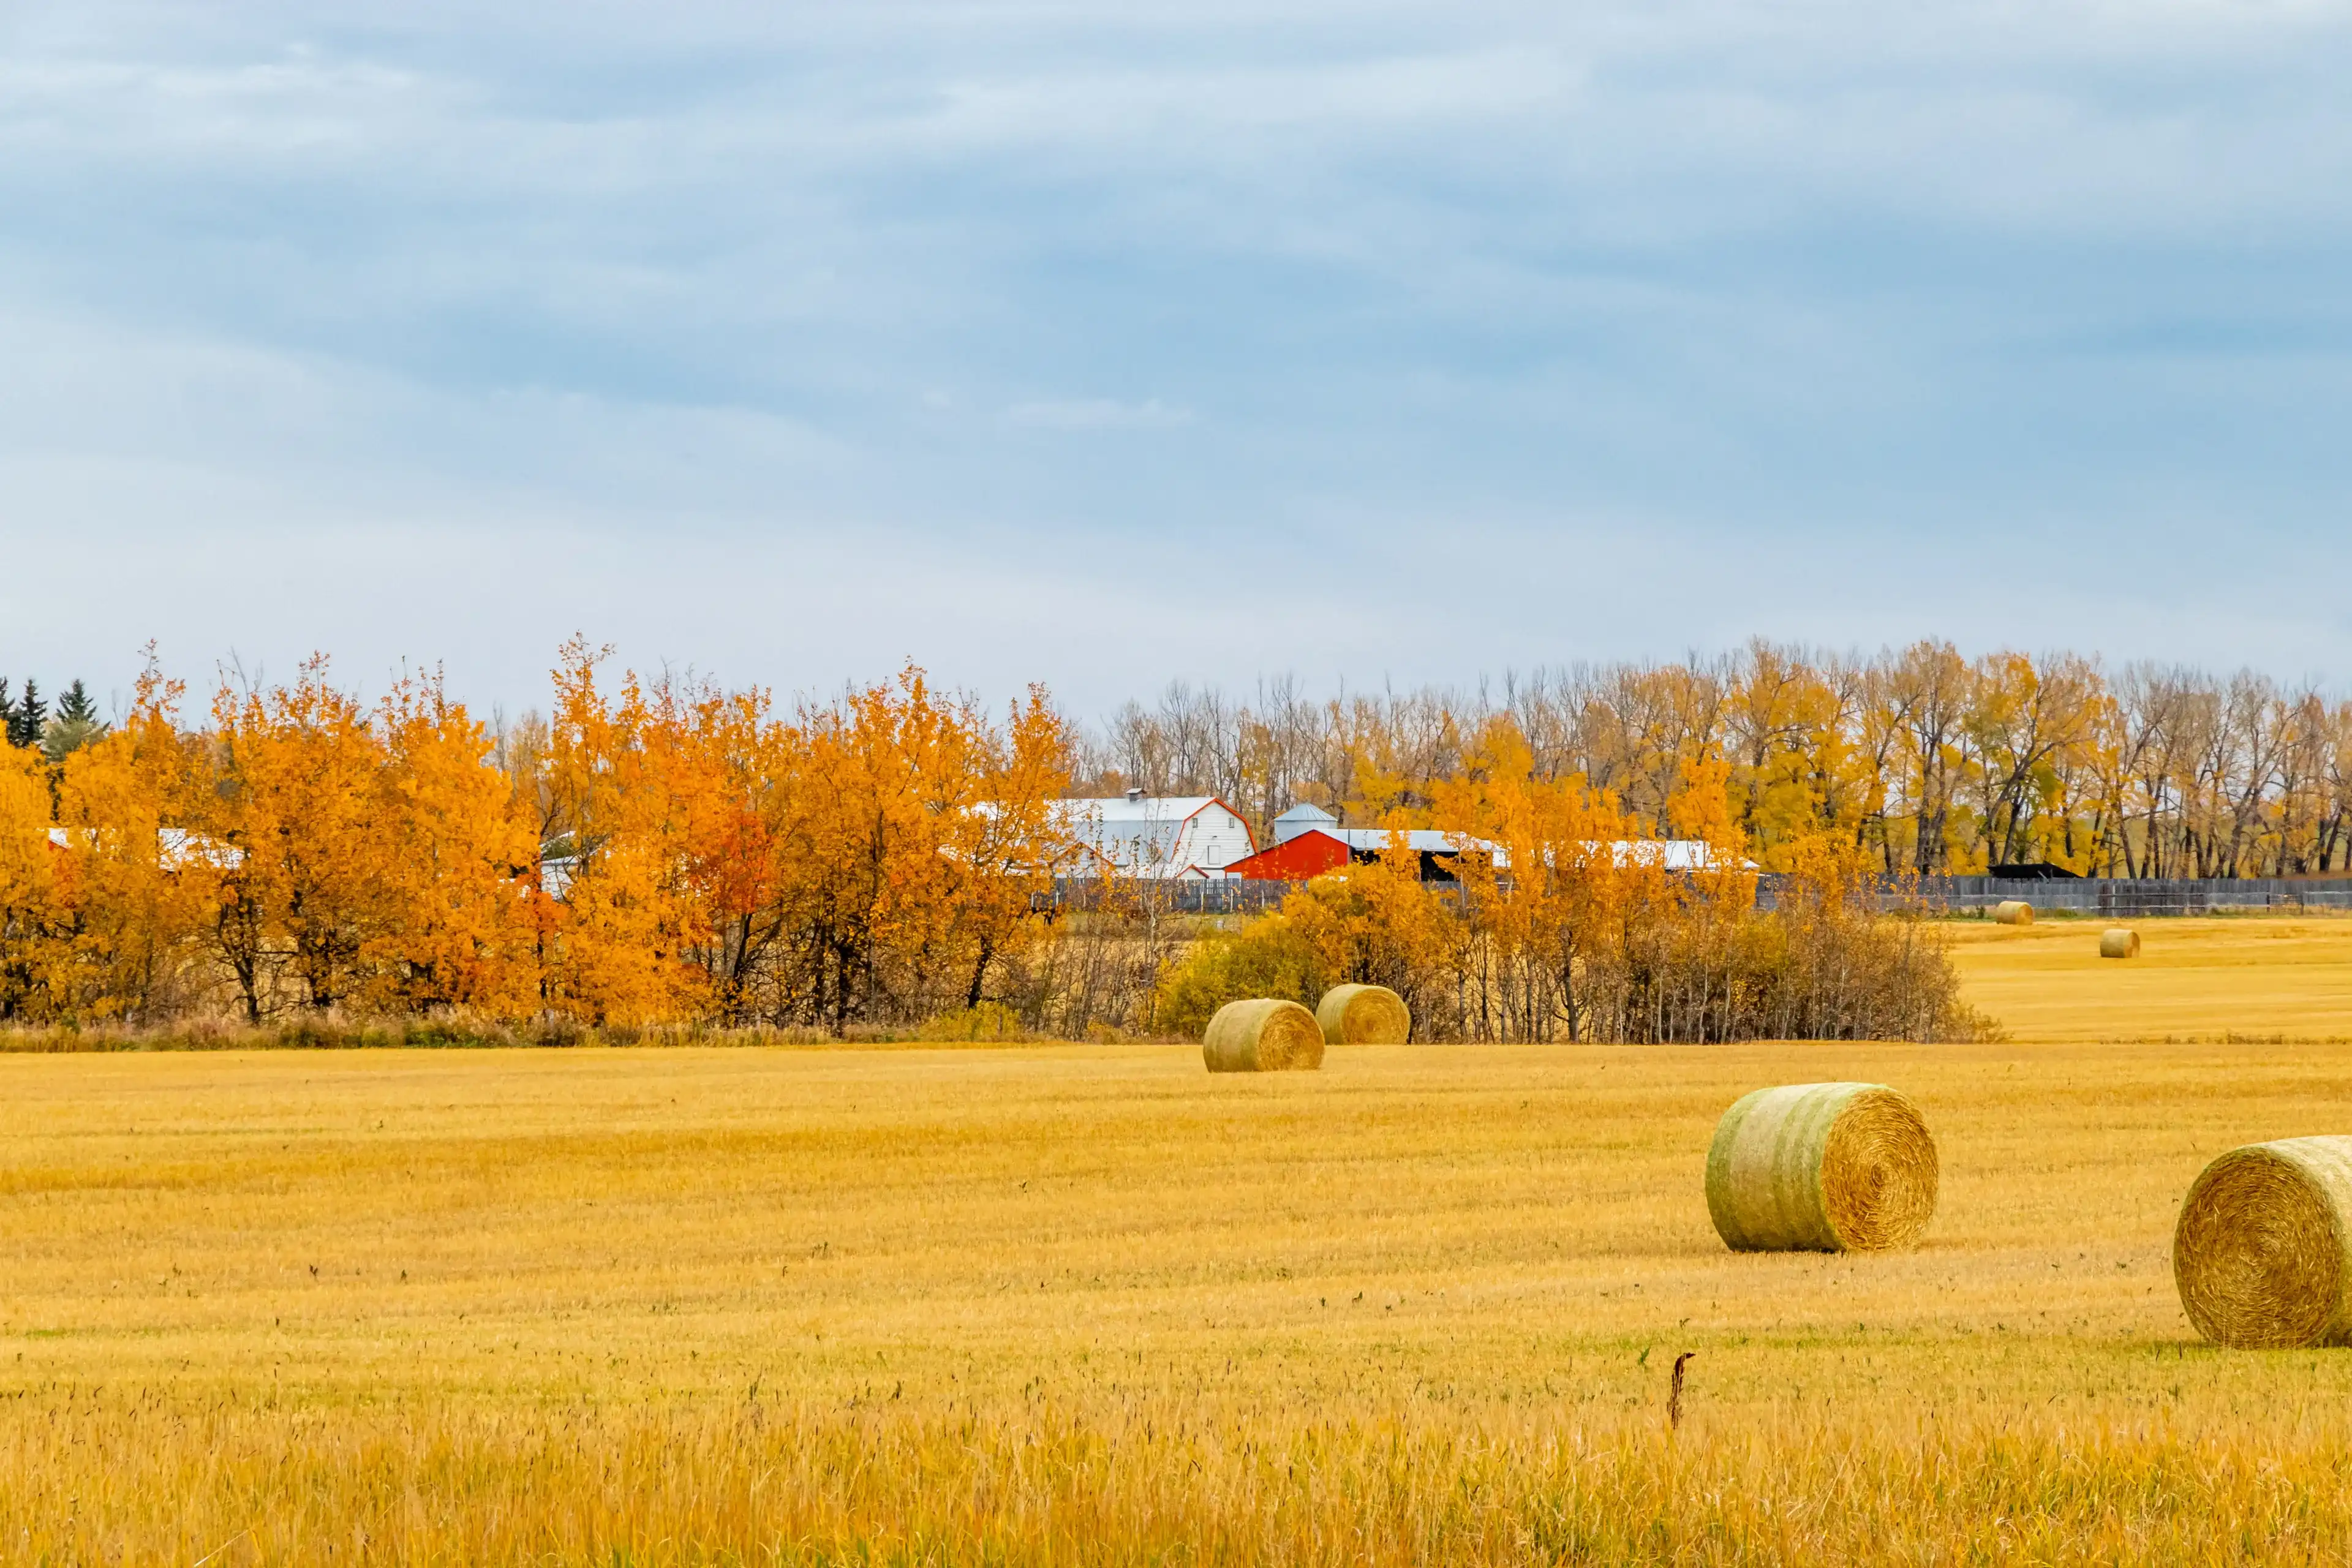 Hay bales wait for storing in a field under fall colours. Red Deer County, Alberta, Canada